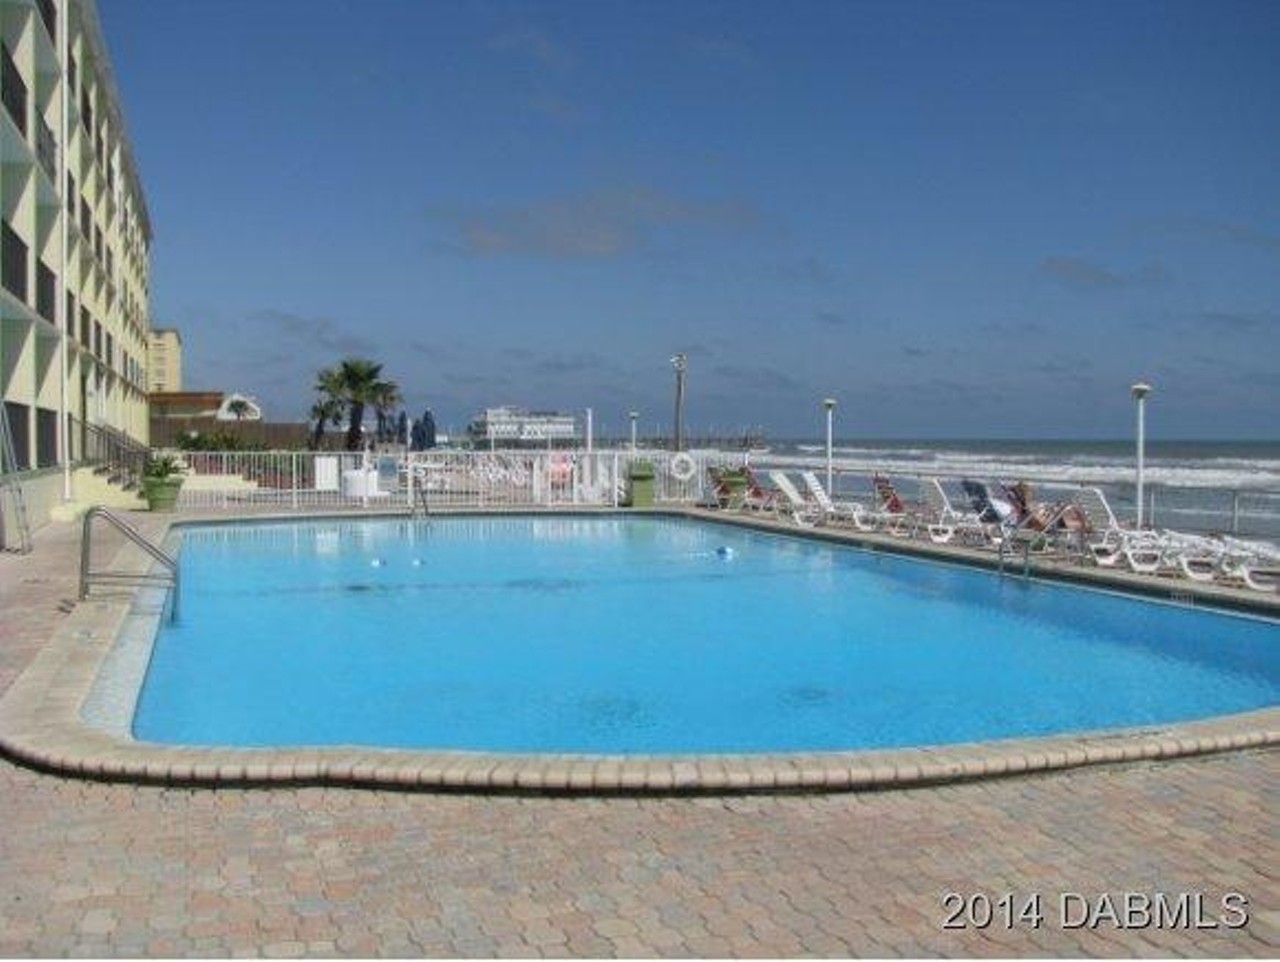 But it has this awesome pool that's right on the beach. Let us reiterate: $30,000 is the asking price.